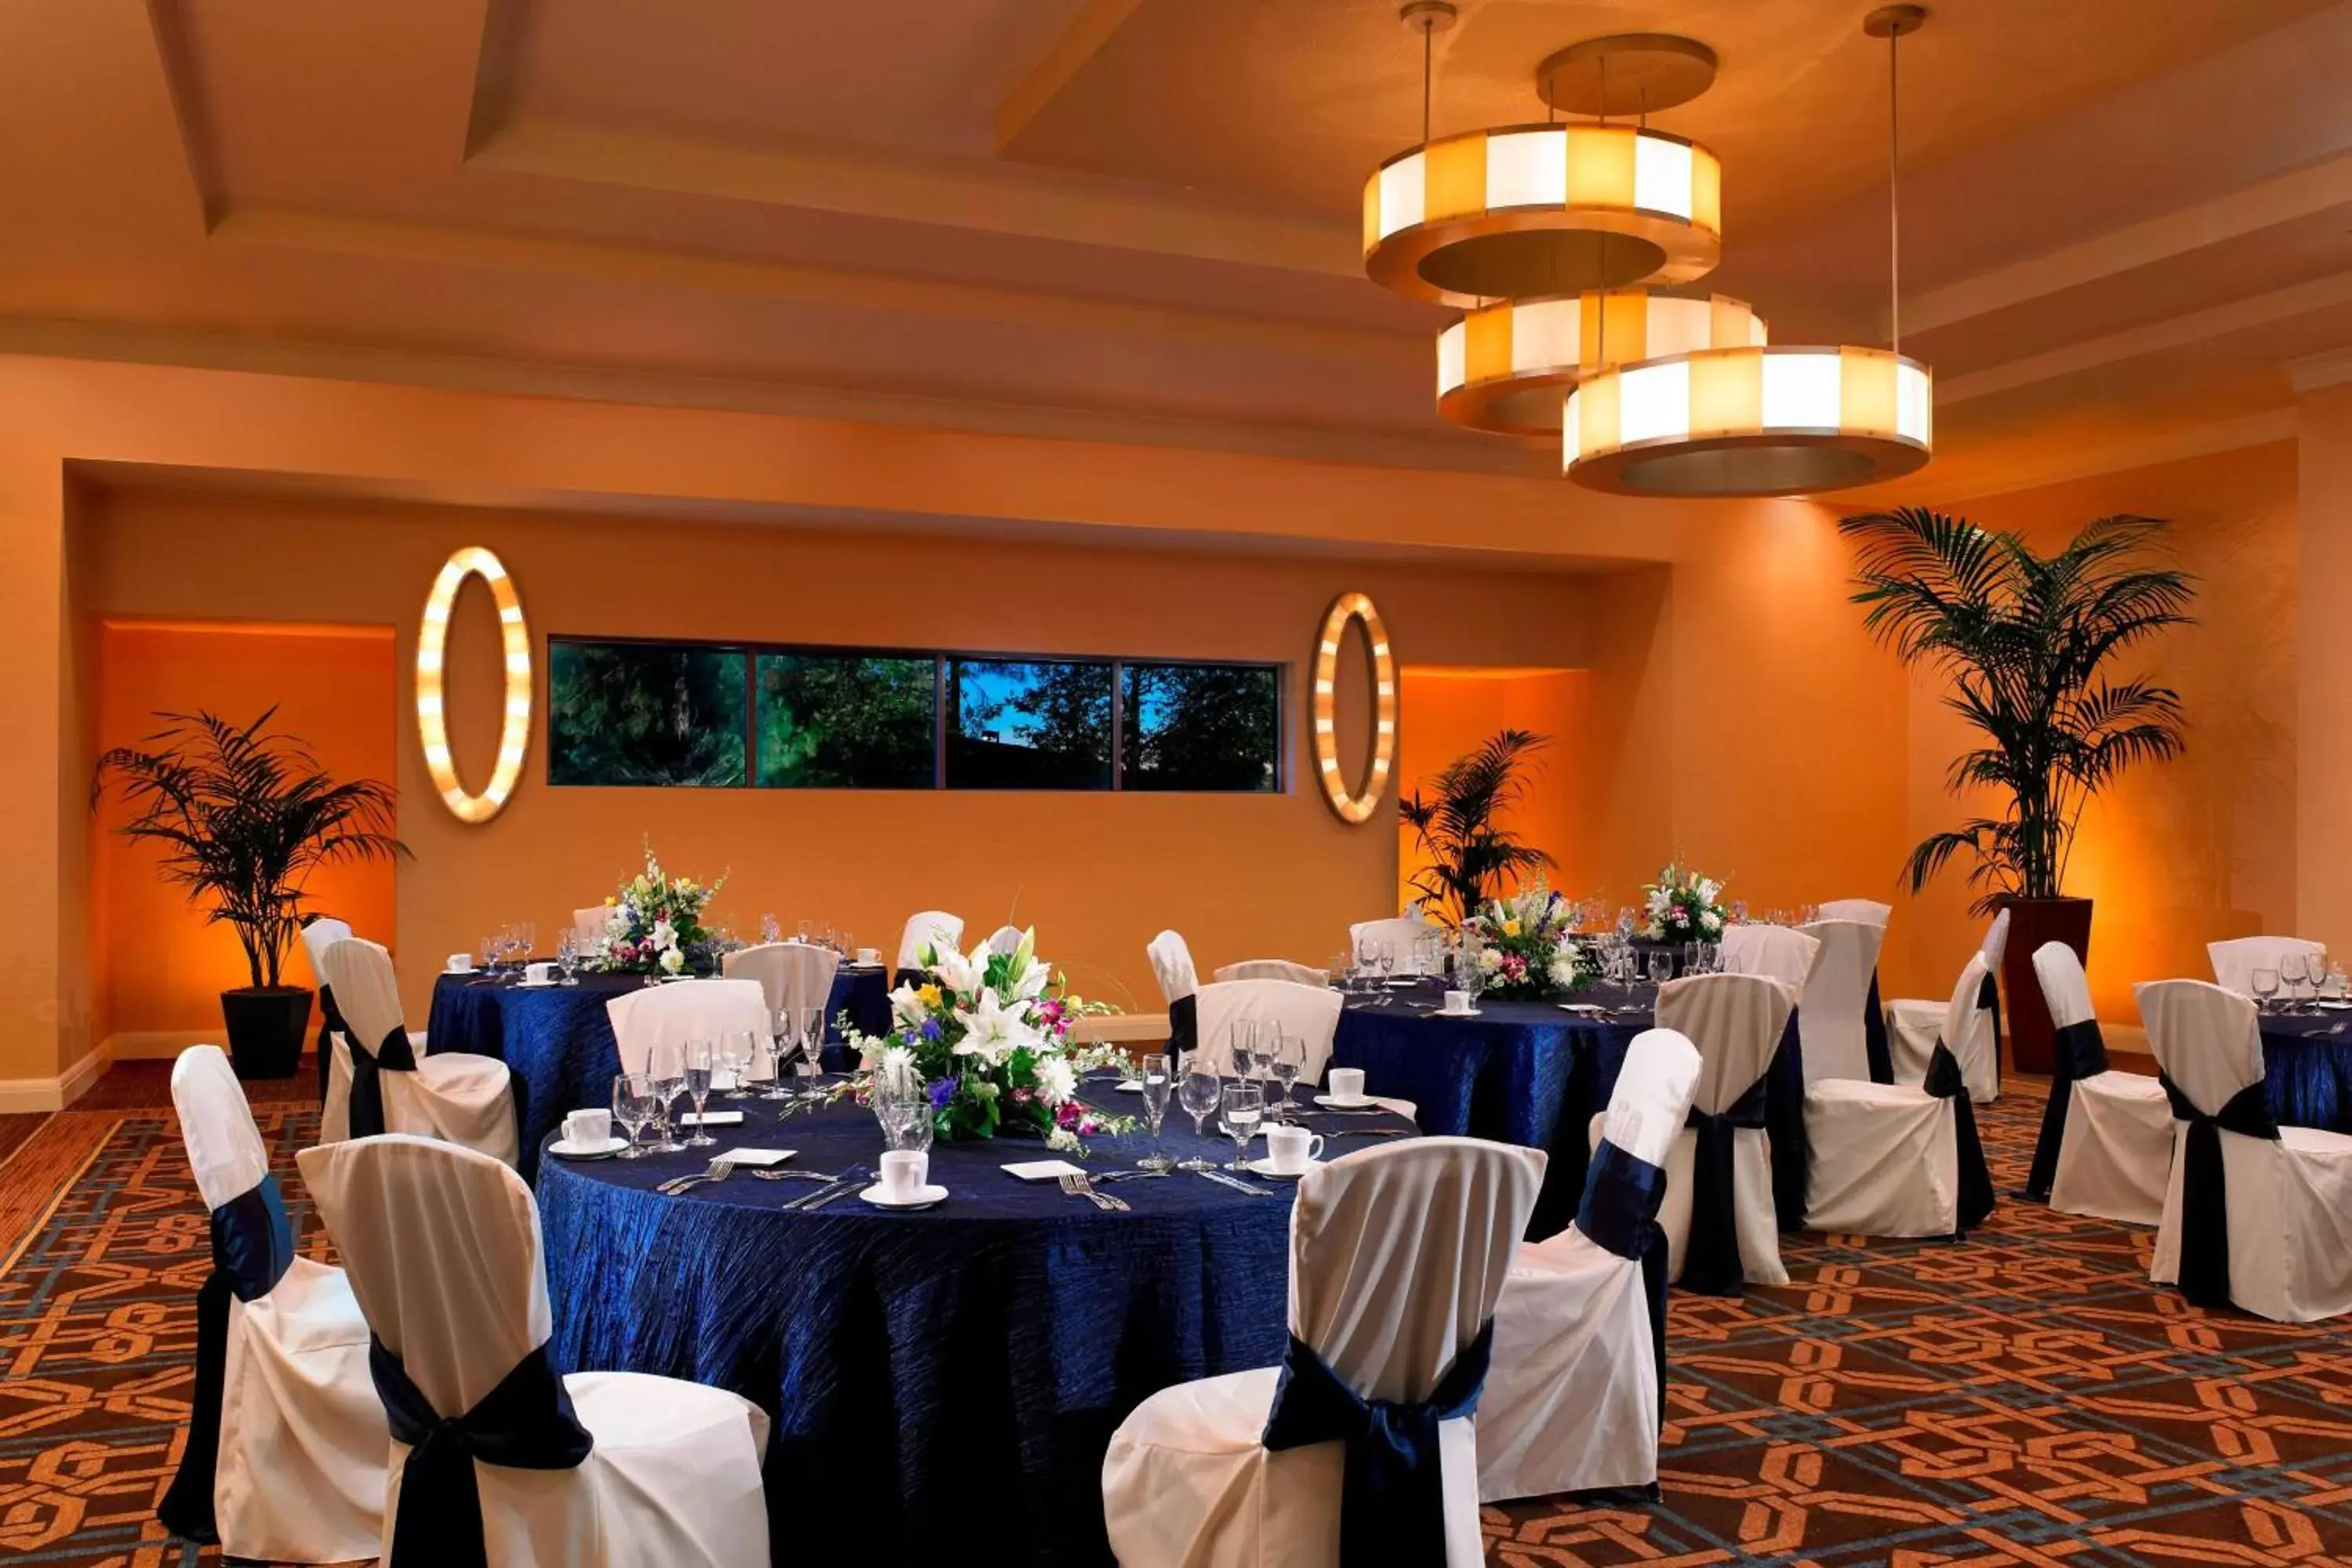 Meeting/conference room, Banquet Facilities in Sheraton Agoura Hills Hotel